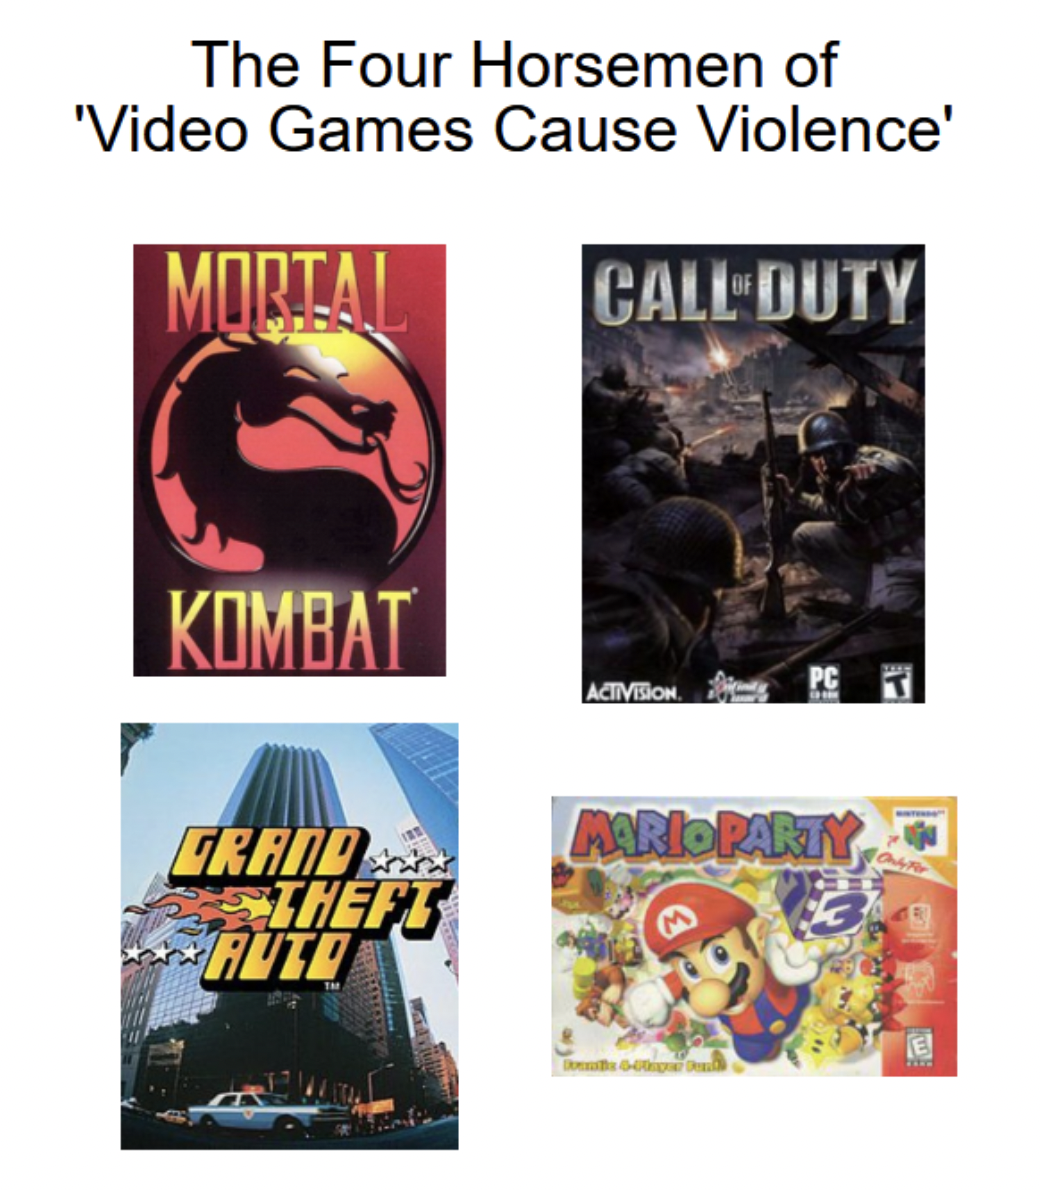 Gaming memes - call of duty 1 - The Four Horsemen of 'Video Games Cause Violence' Morial Call Duty Kombat Grand Theft Auto Activision Mario Party T